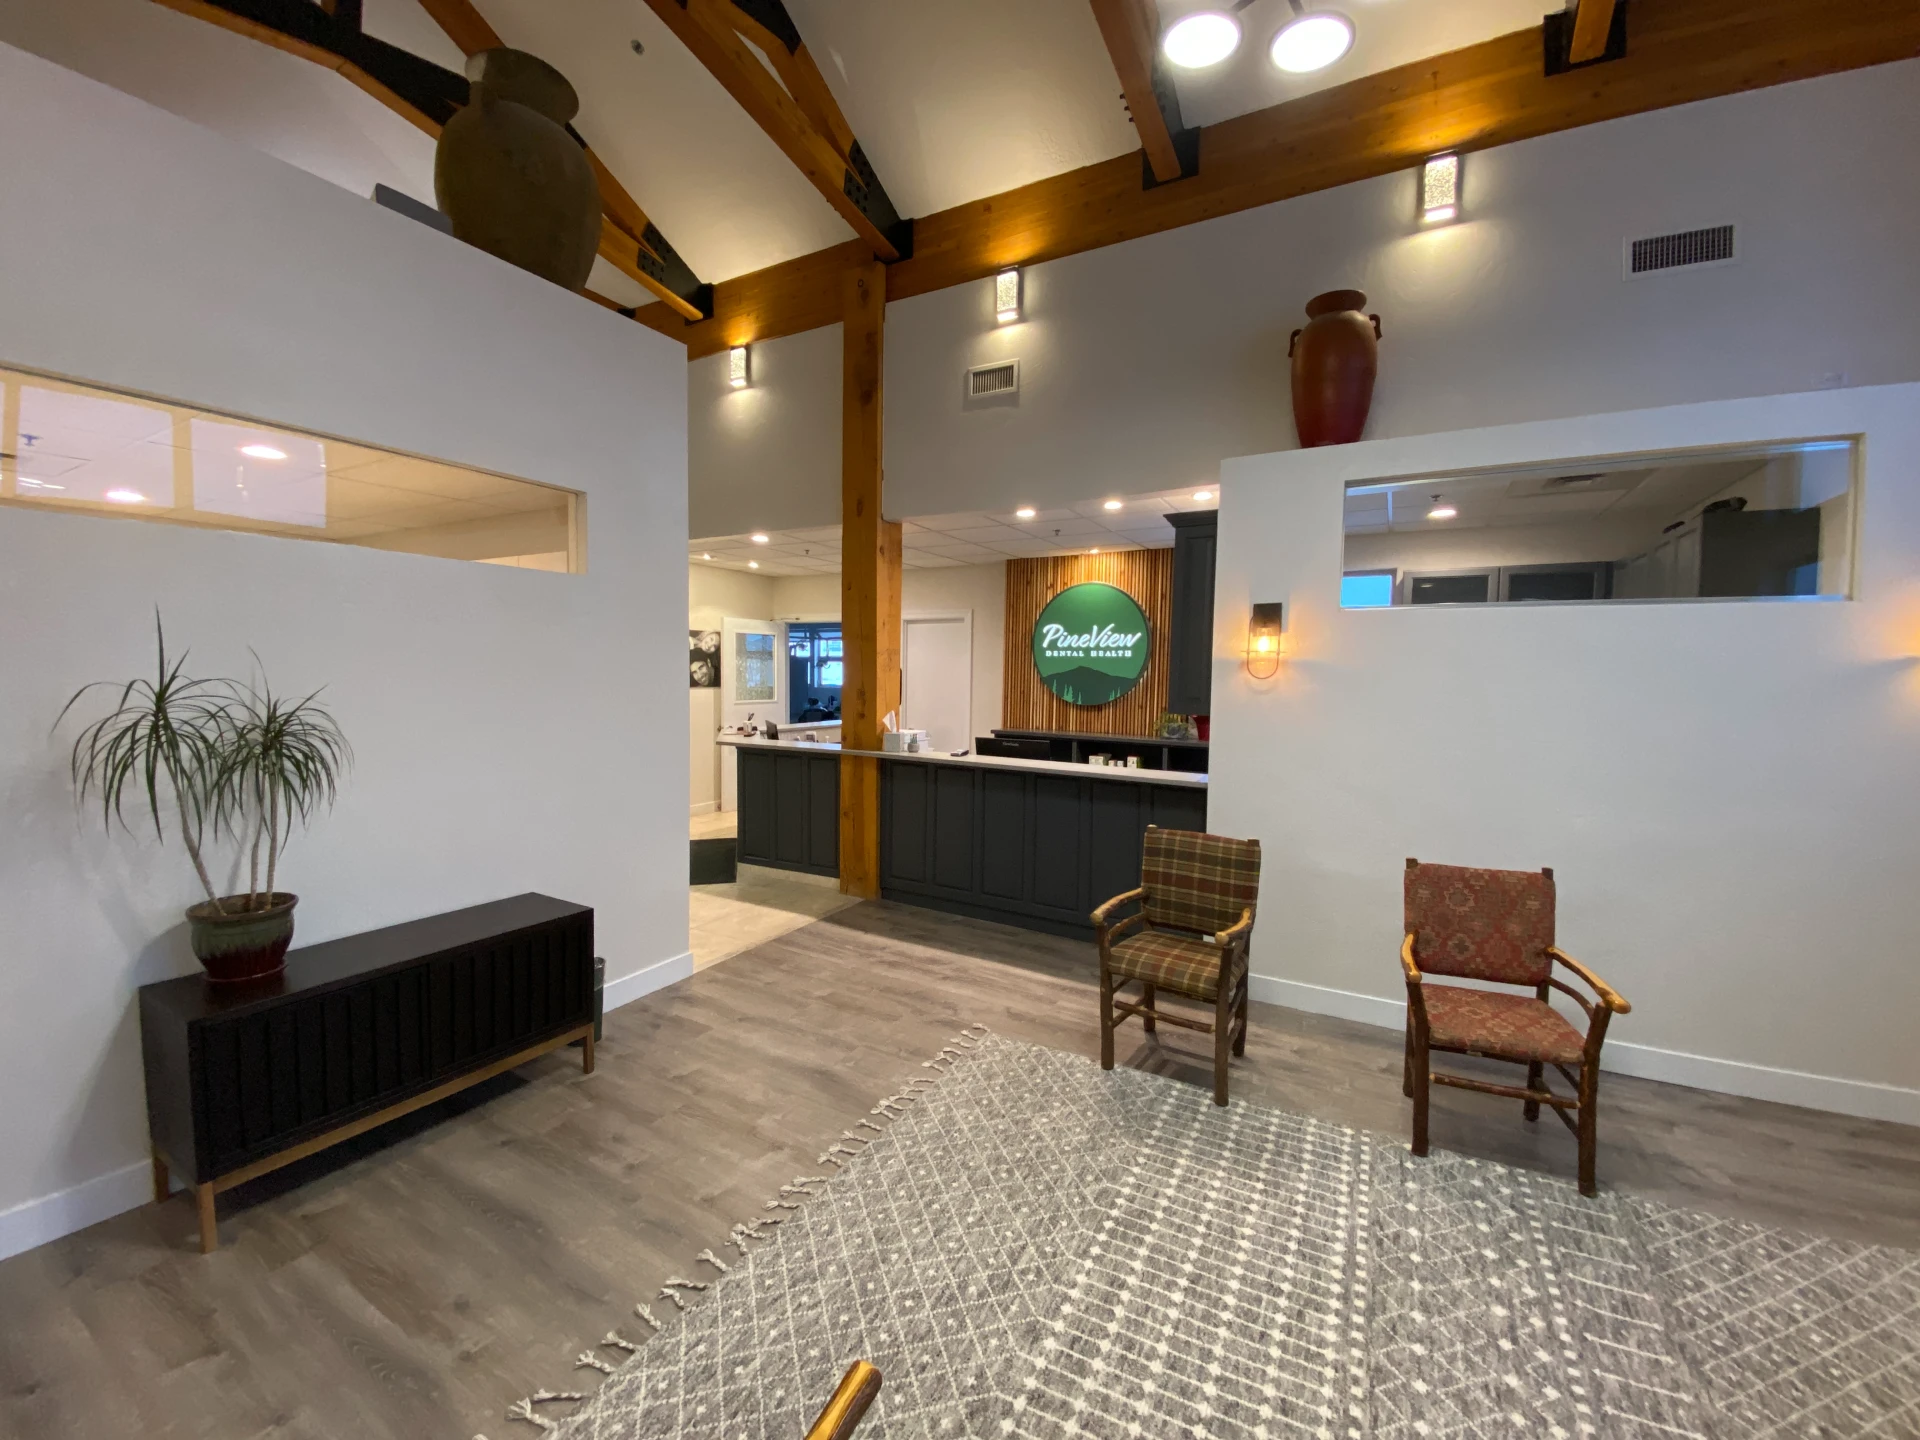 new lobby at PineView Dental Health | visit us for a teeth cleaning in Park City, UT